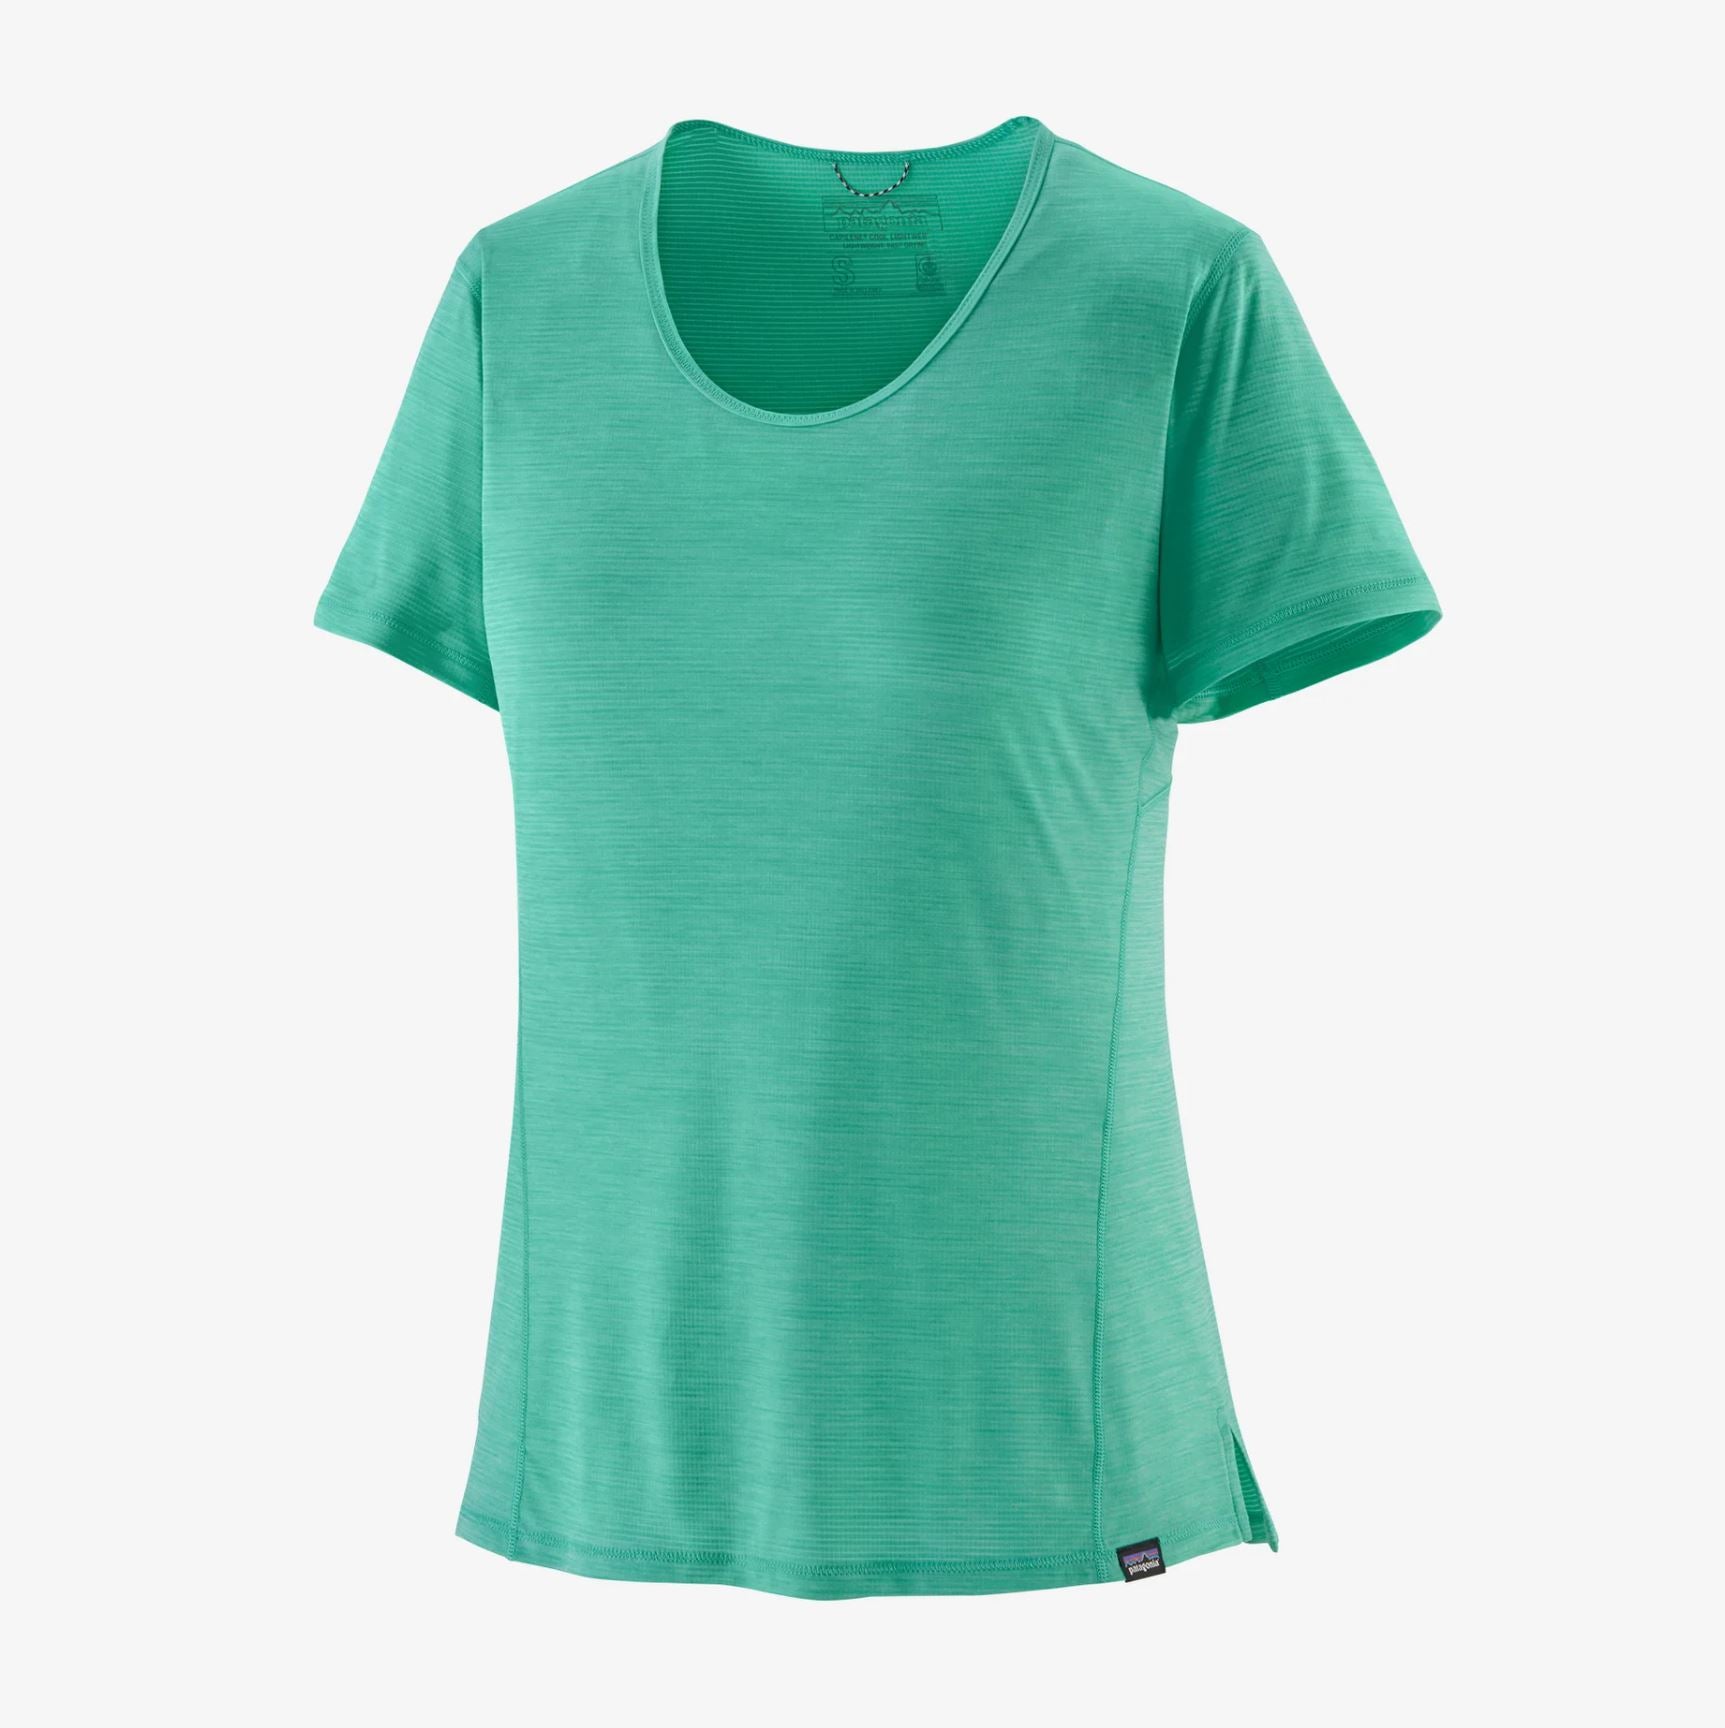 front view of the patagonia womens short sleeve capilene cool lightweight tee in the color FRTX